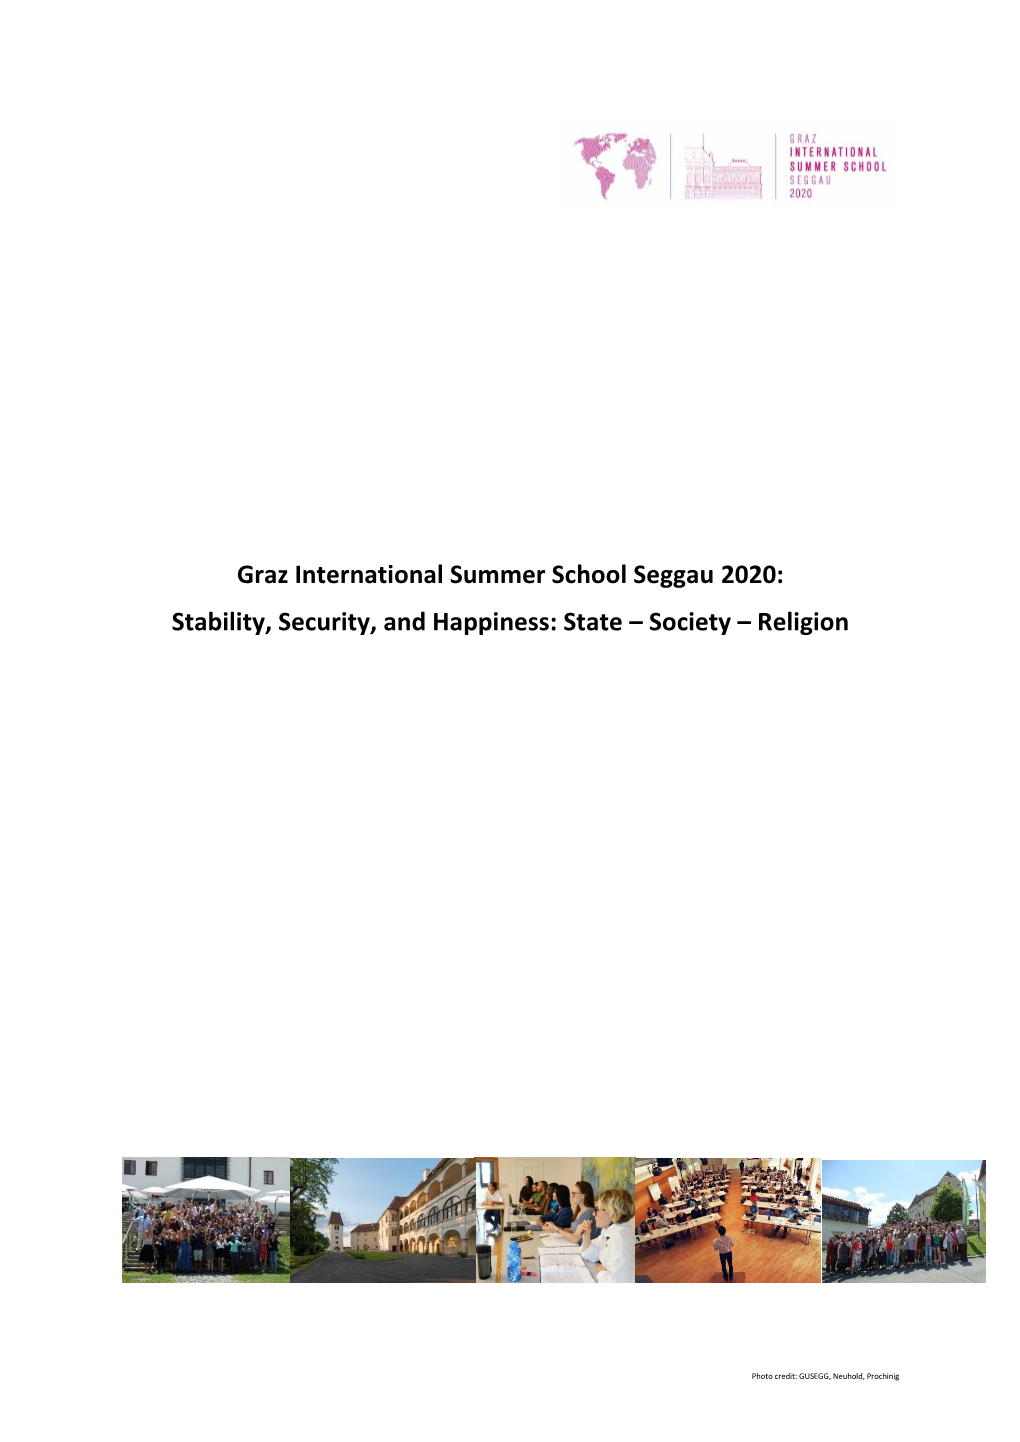 Graz International Summer School Seggau 2020: Stability, Security, and Happiness: State – Society – Religion